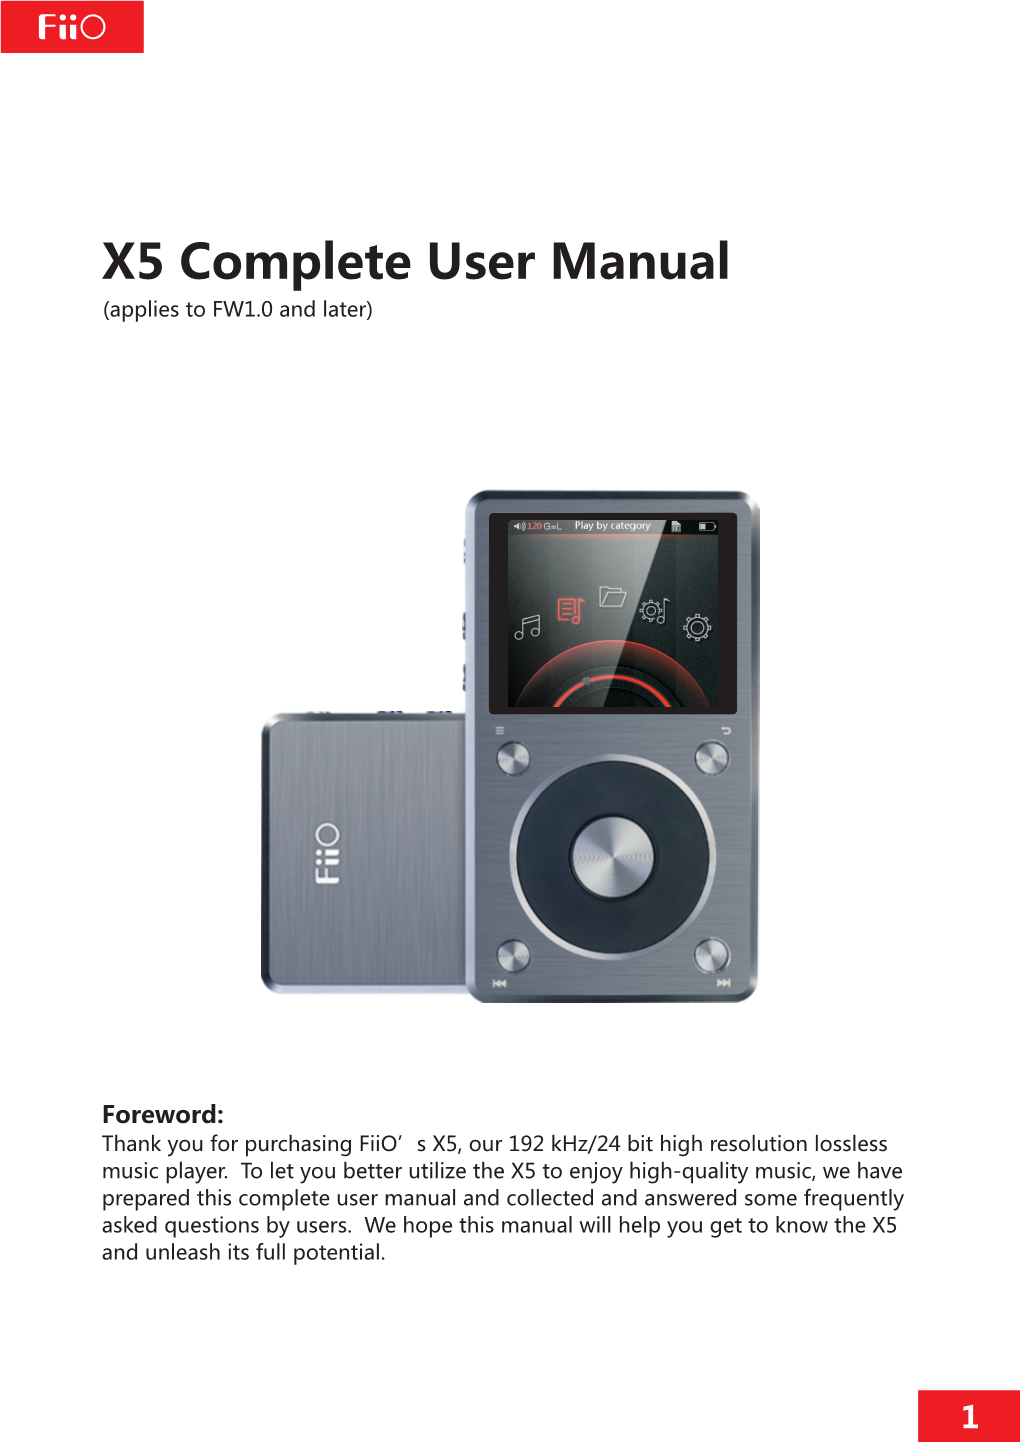 X5 Complete User Manual (Applies to FW1.0 and Later)